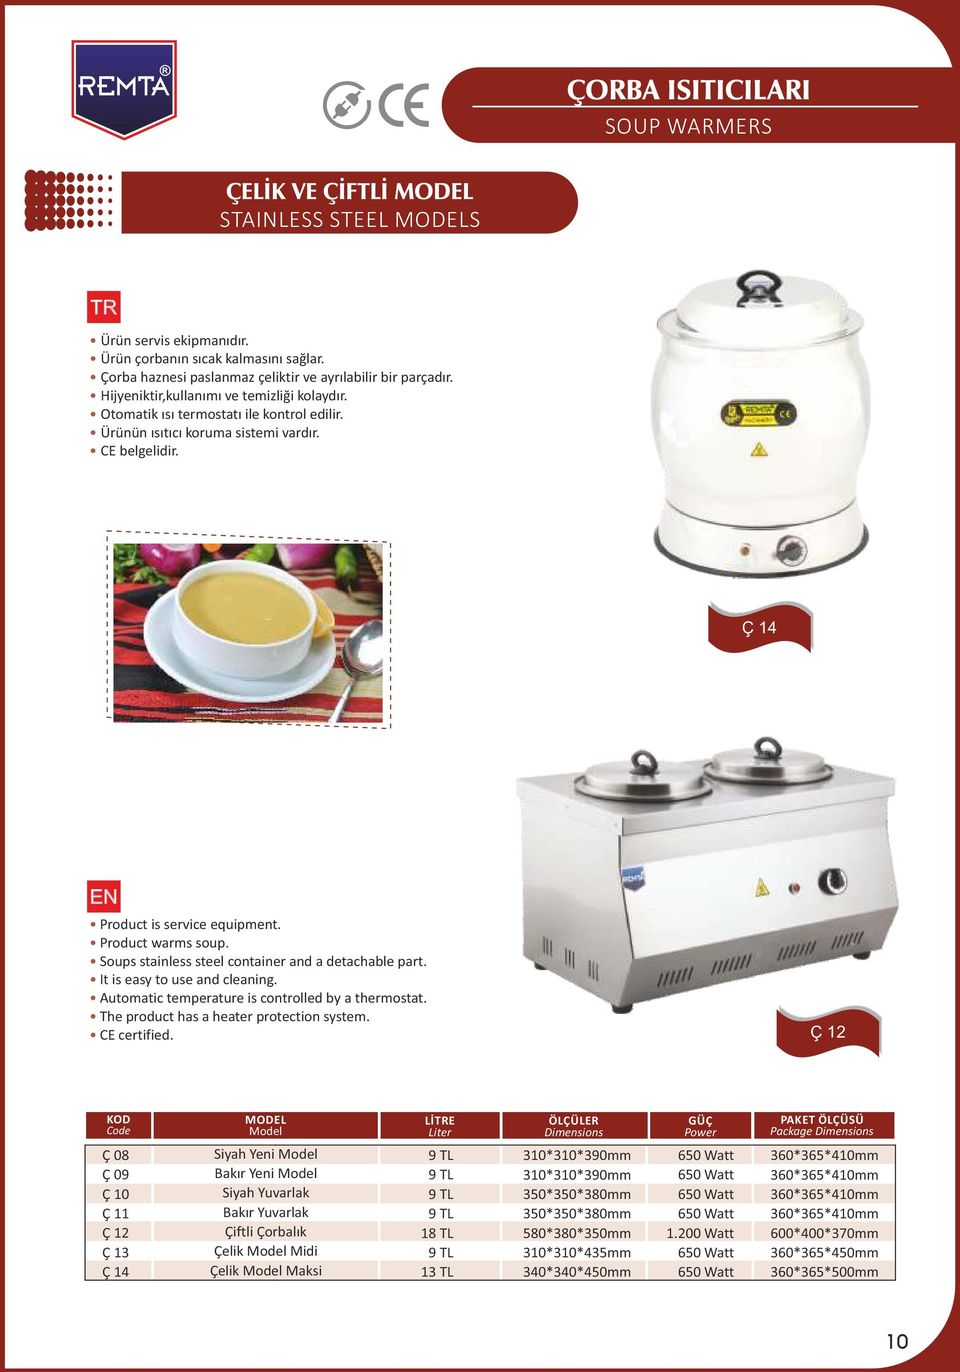 Soups stainless steel container and a detachable part. It is easy to use and cleaning. Automatic temperature is controlled by a thermostat. The product has a heater protection system.